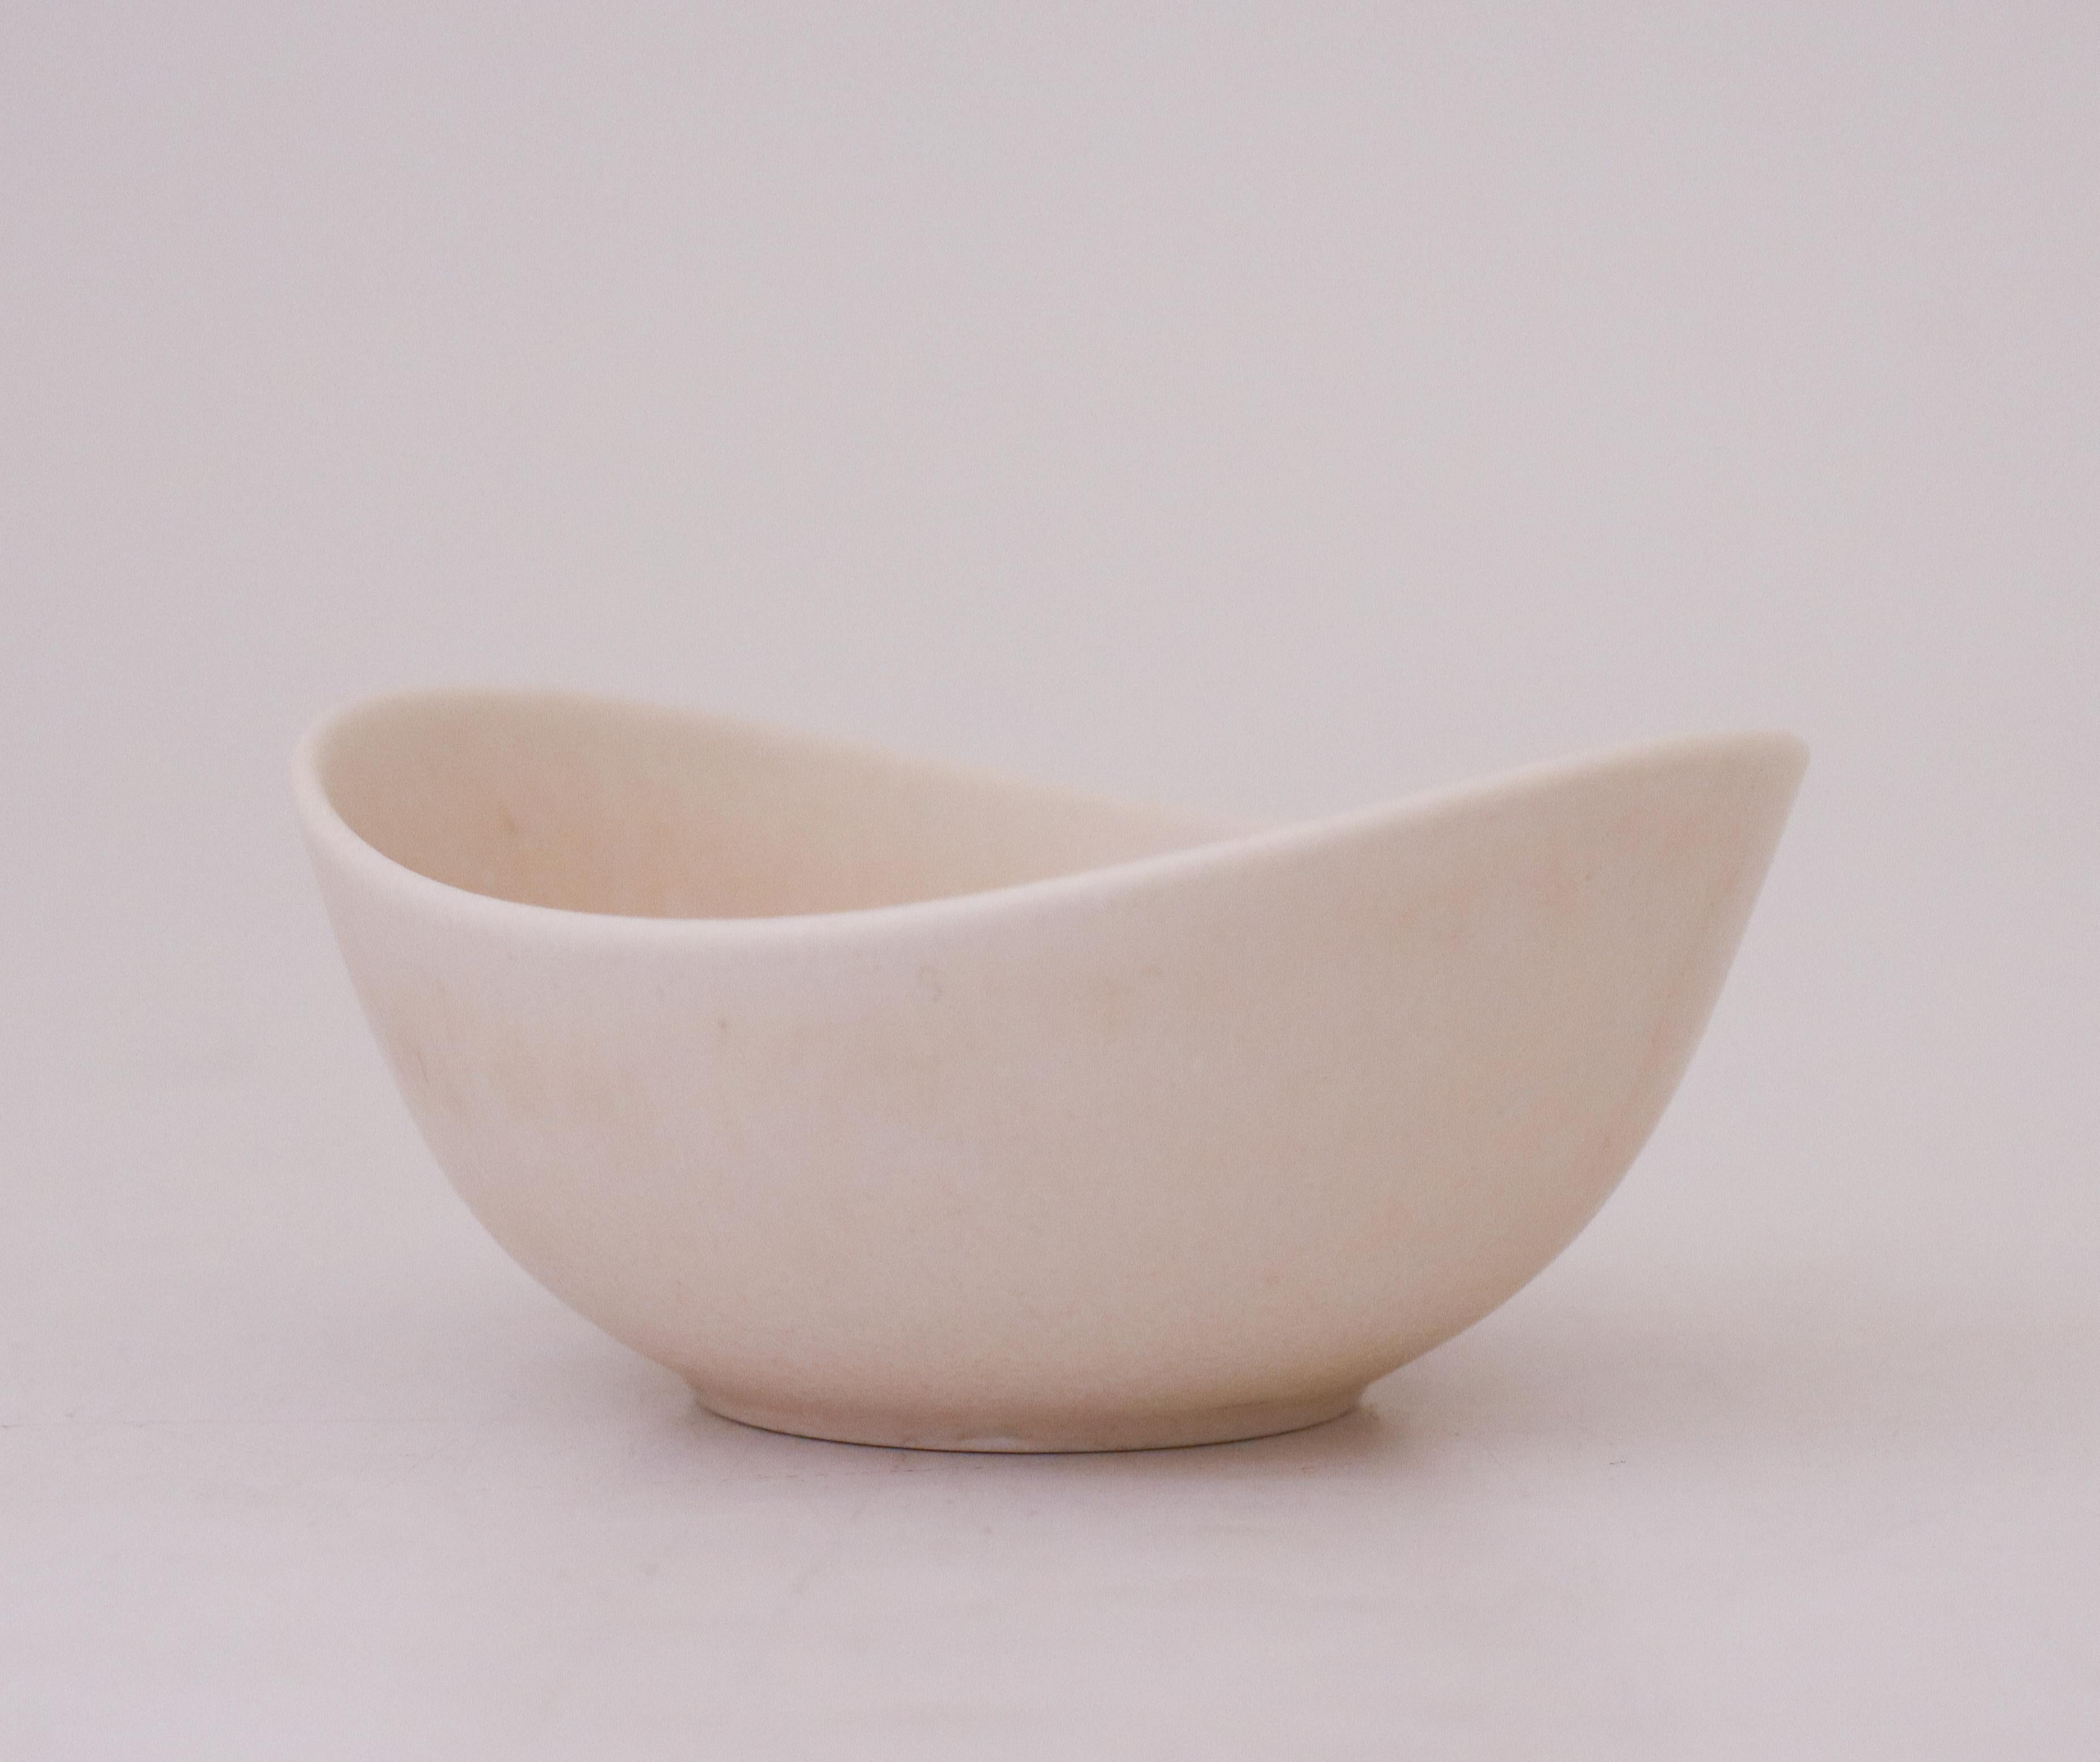 A lovely white bowl with a beautiful glaze designed by Gunnar Nylund at Rörstrand, it´s 10 x 9.5 cm in diameter. It´s in very good condition except from some minor marks and scratches. It is marked as 2nd quality.

Gunnar Nylund was born in Paris